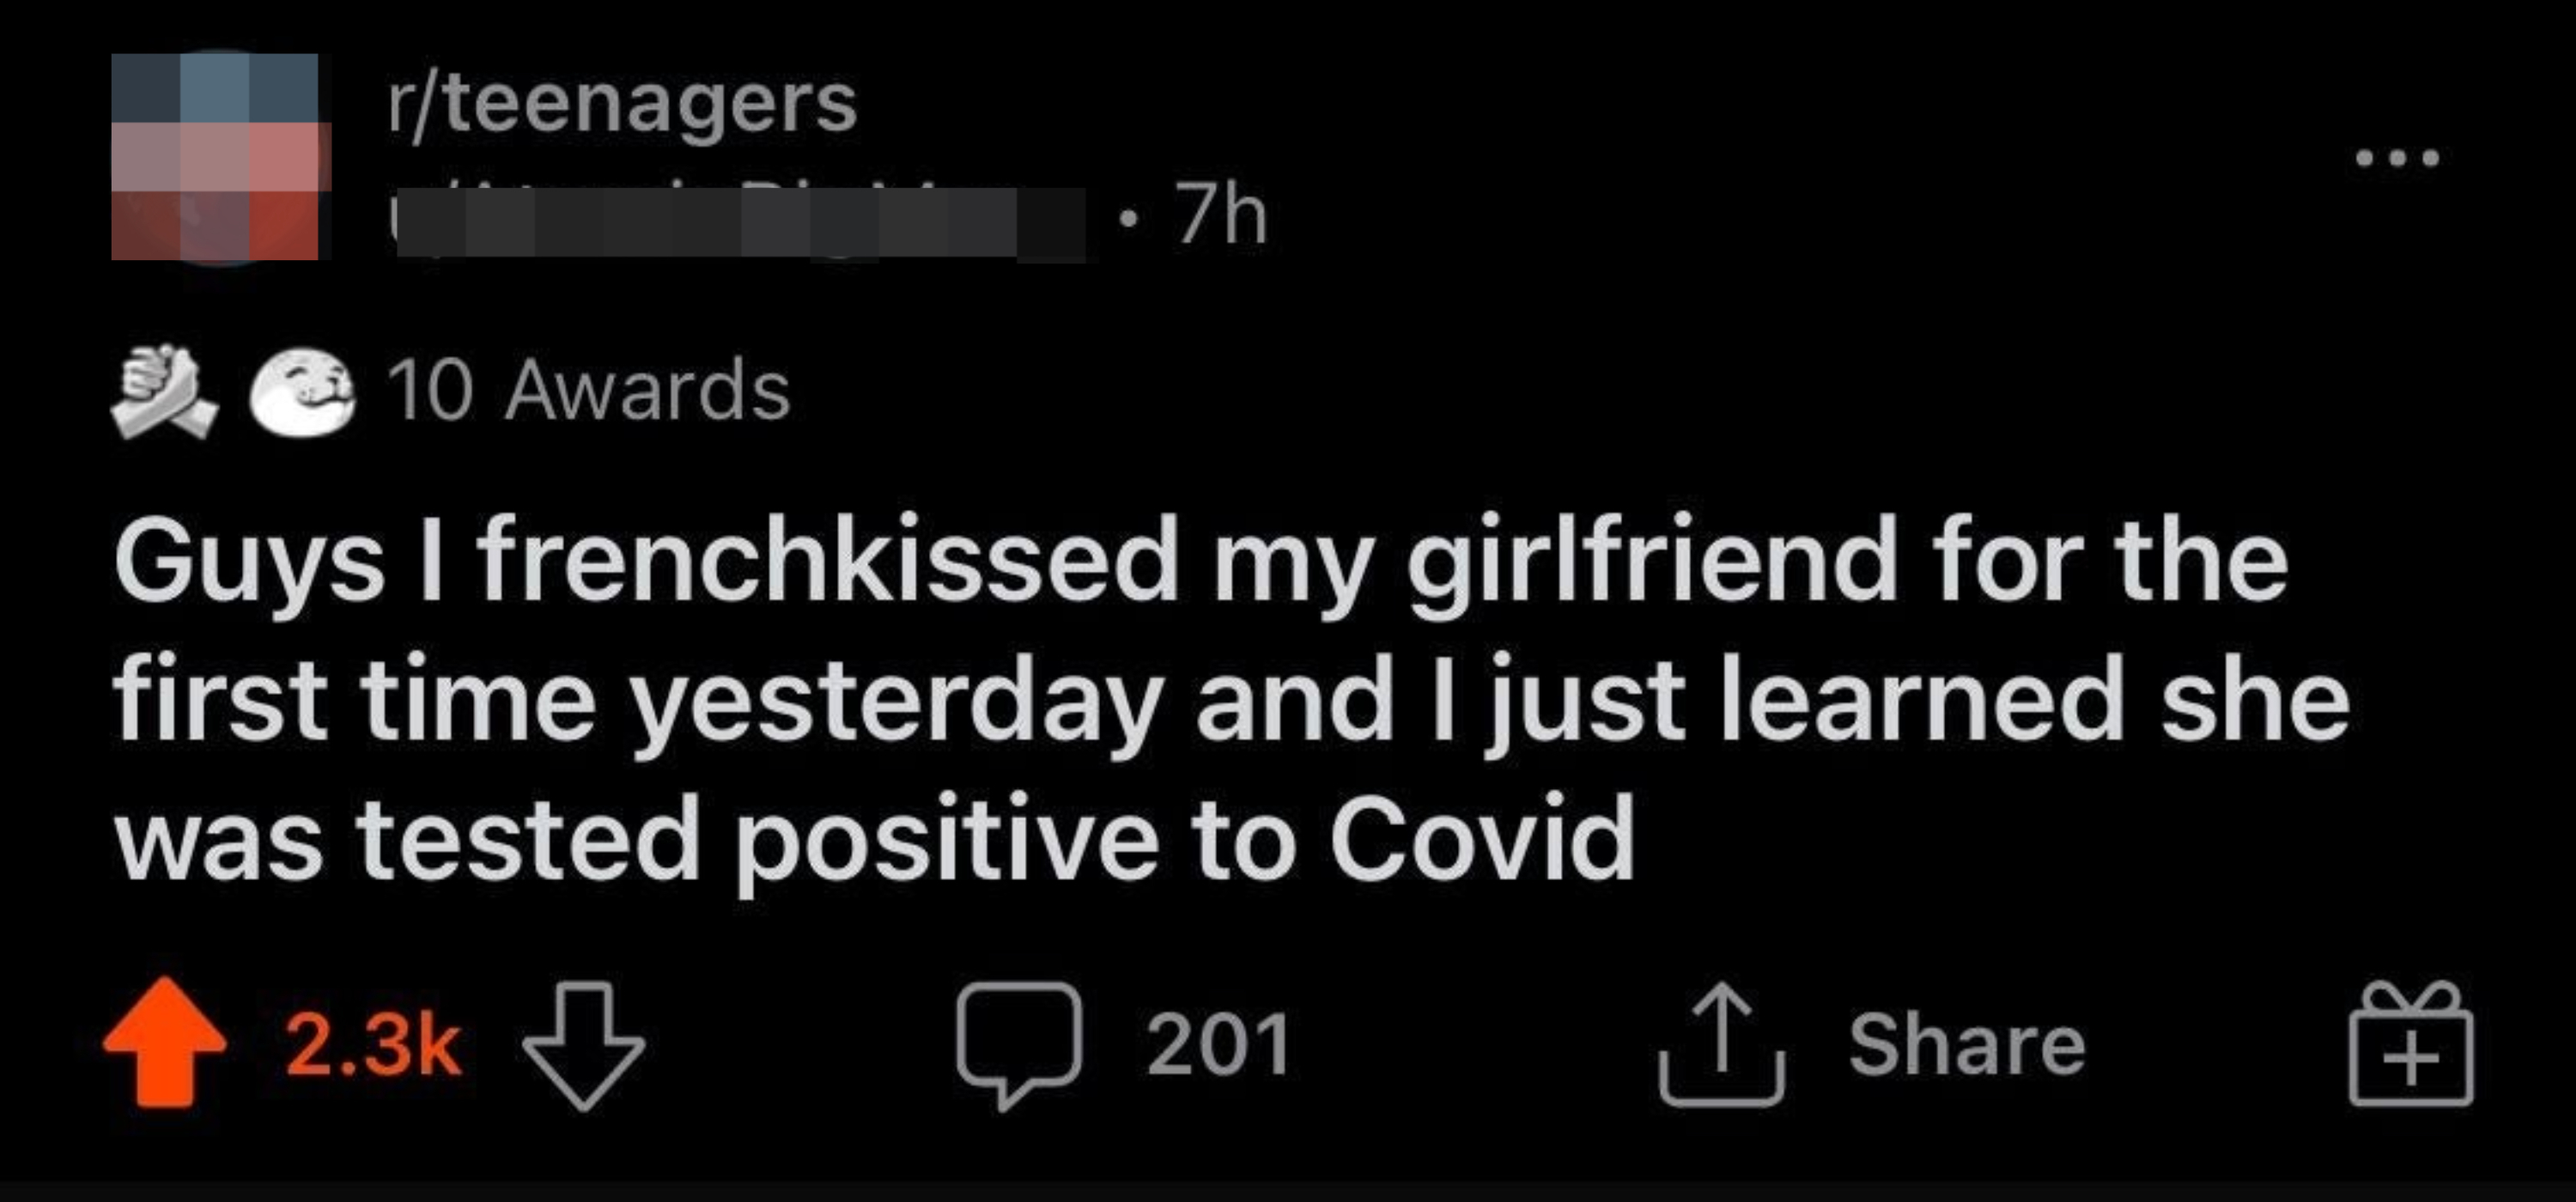 &quot;Guys I frenchkissed my girlfriend for the first time yesterday and I just learned she was tested positive for Covid&quot;